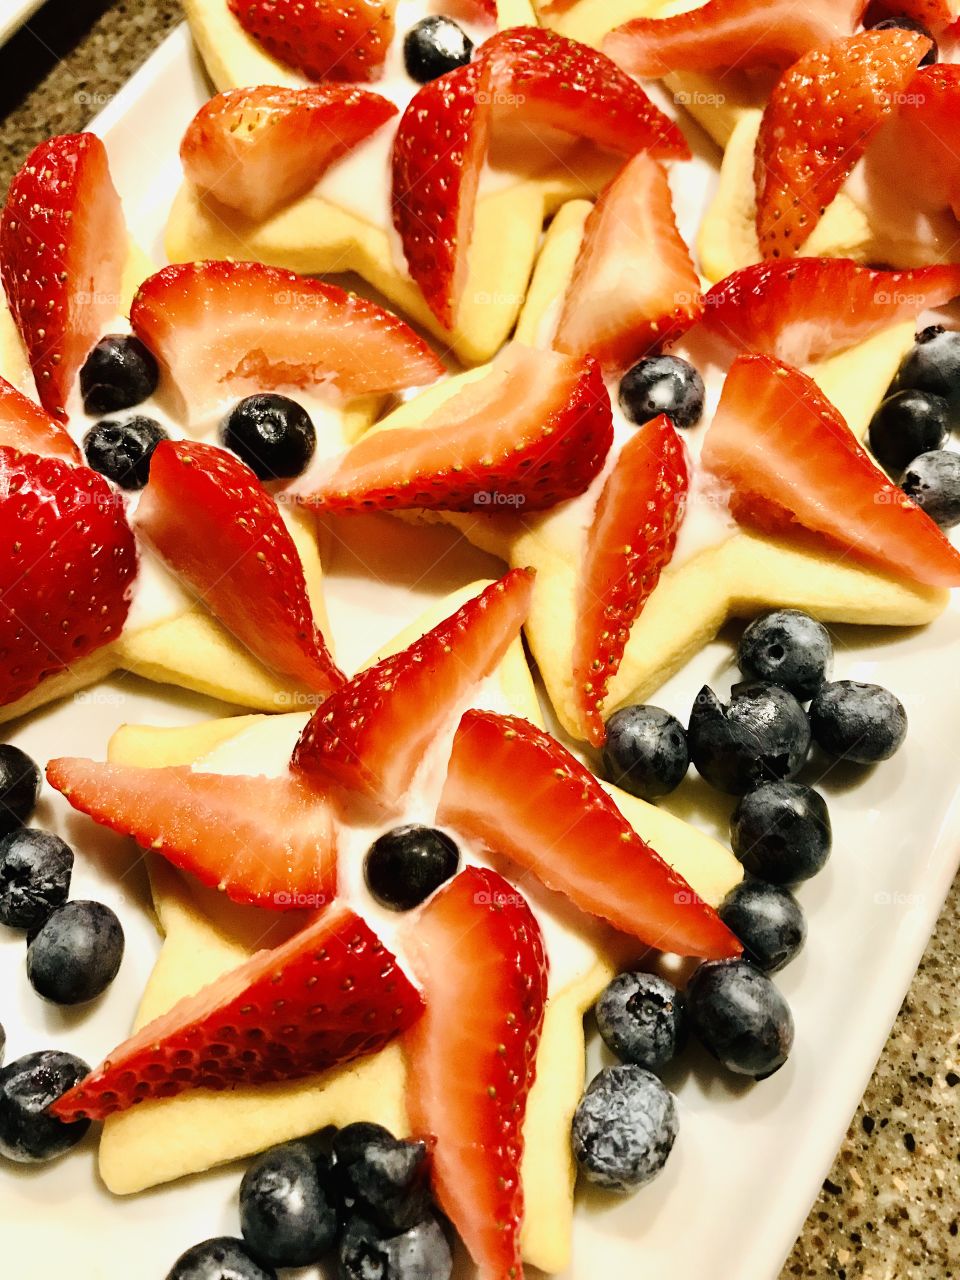 Plate of delicious star sugar cookies topped with bright red juicy strawberries and beautiful dark blue blueberries perfect for the Patriotic holiday!!